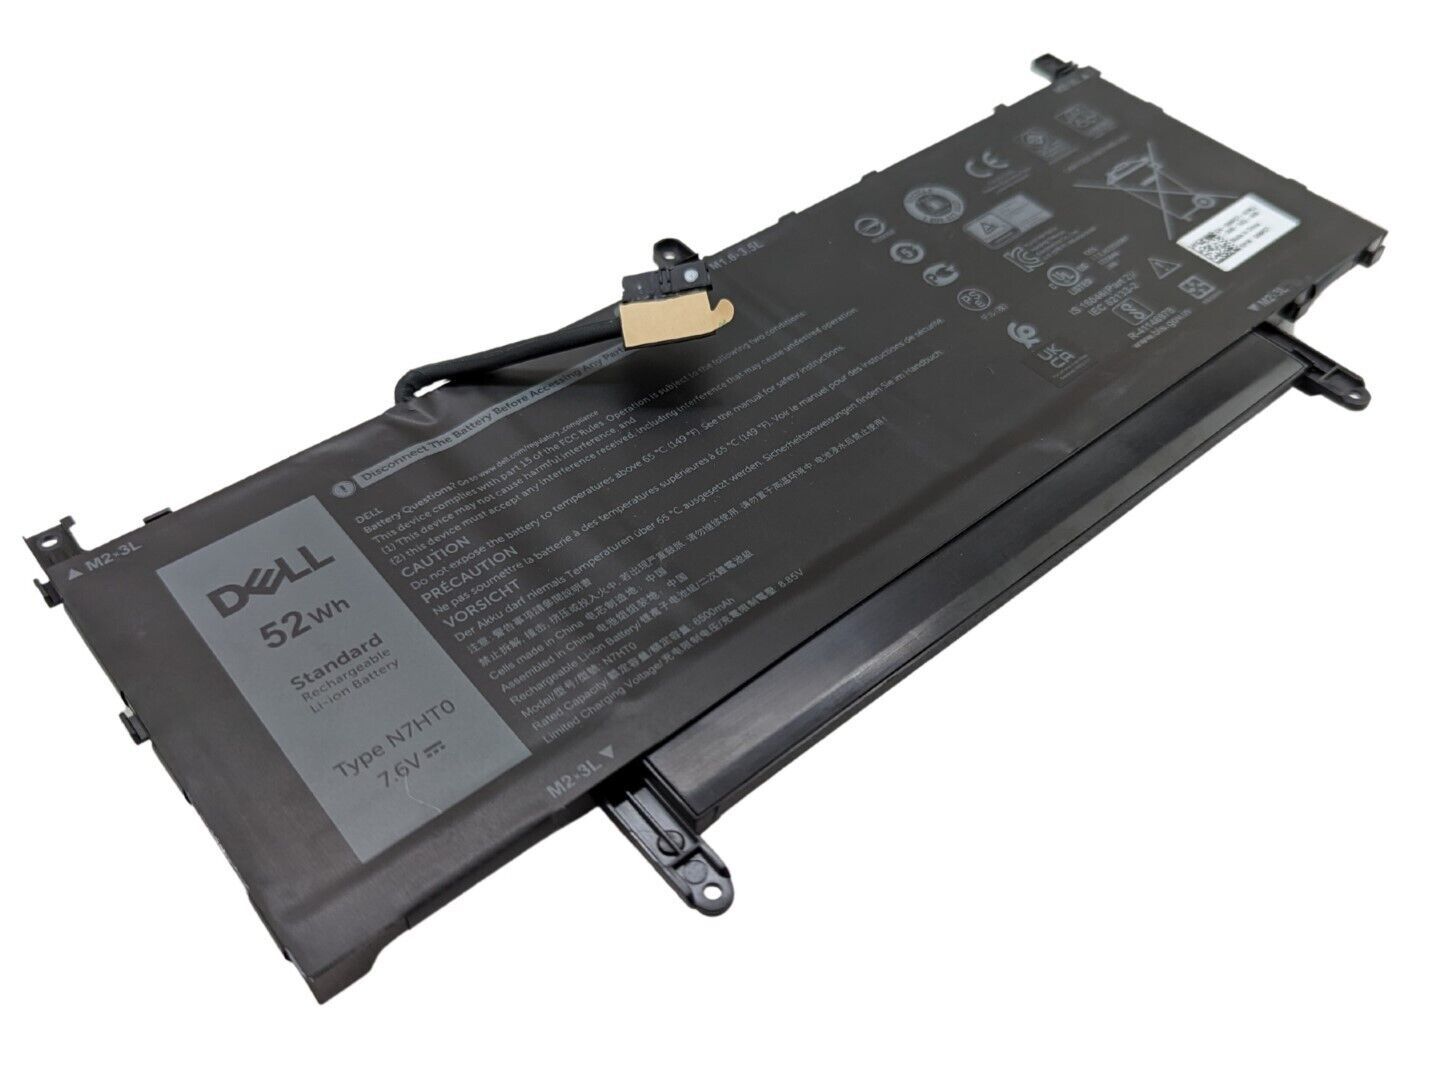 NEW GENUINE Dell Latitude 9510 52Wh 4-cell Laptop Battery - N7HT0 0N7HT0 PKW00 - $79.99